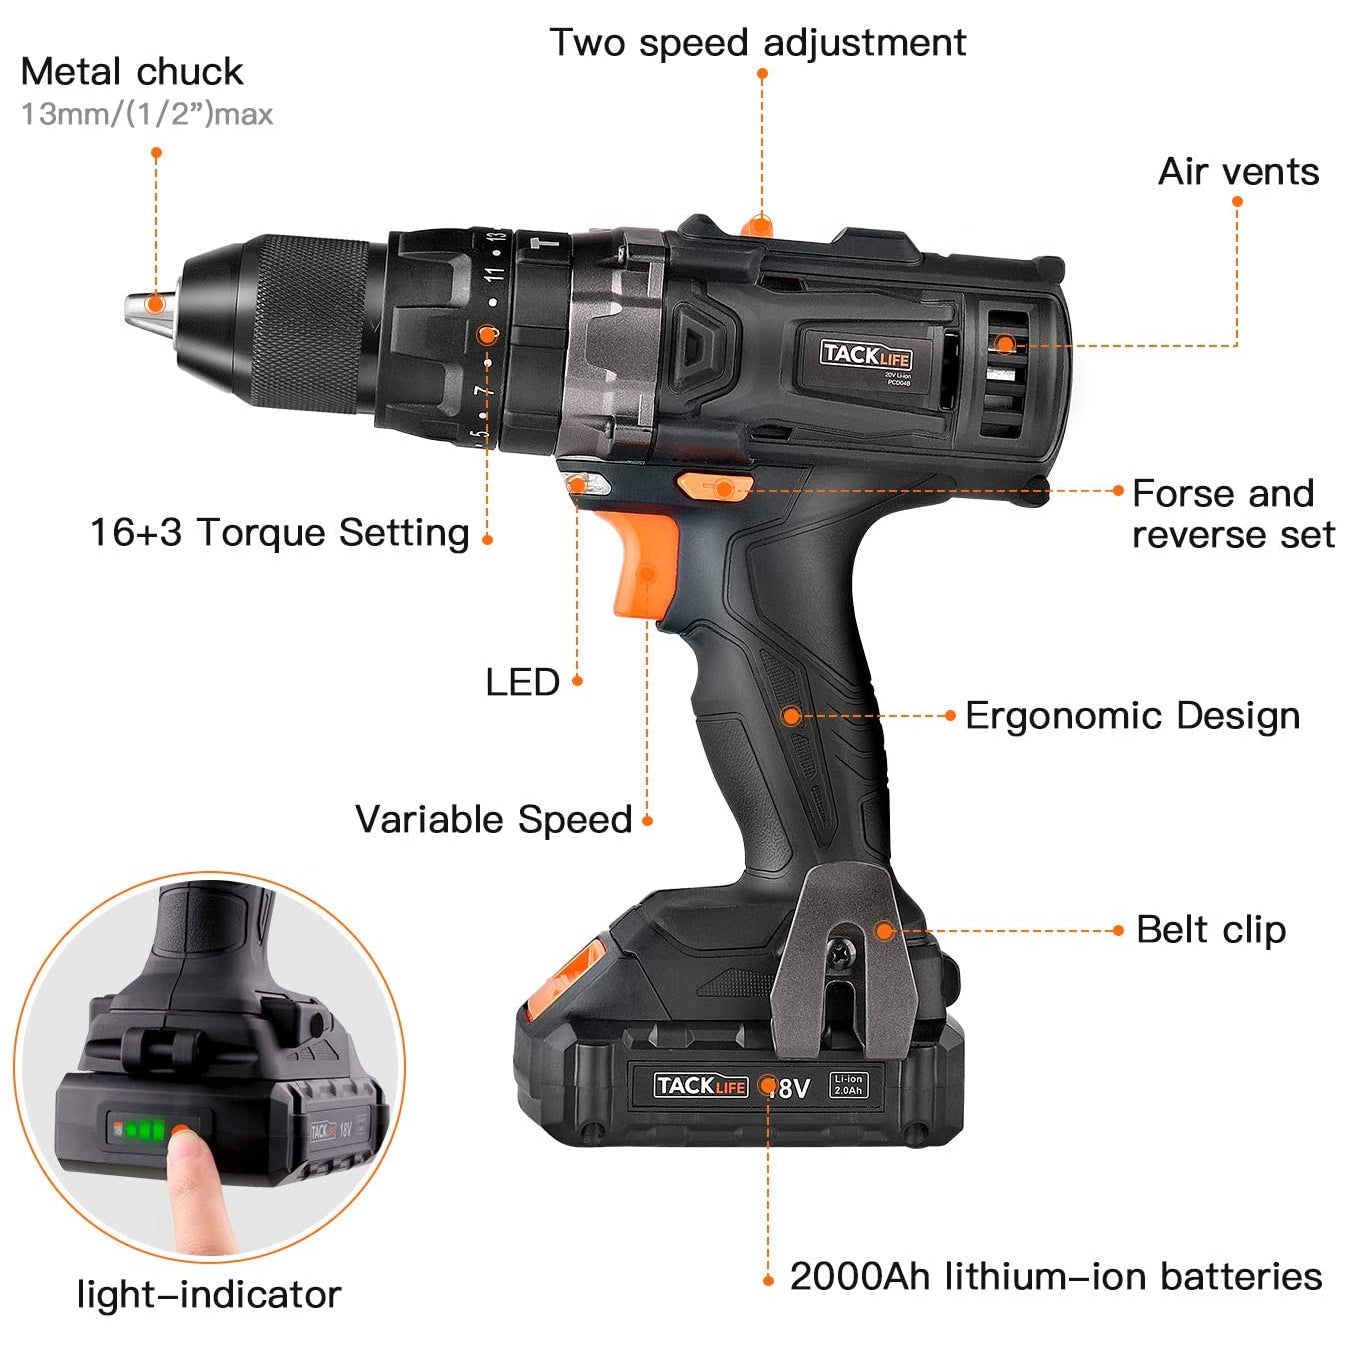 Tacklife PCD04B 20V MAX 2.0Ah Lithium-Ion 1/2" Cordless Drill with Hammer Function, 2-Speed Max Torque 310 In-lbs, 1 Hour Fast Charger